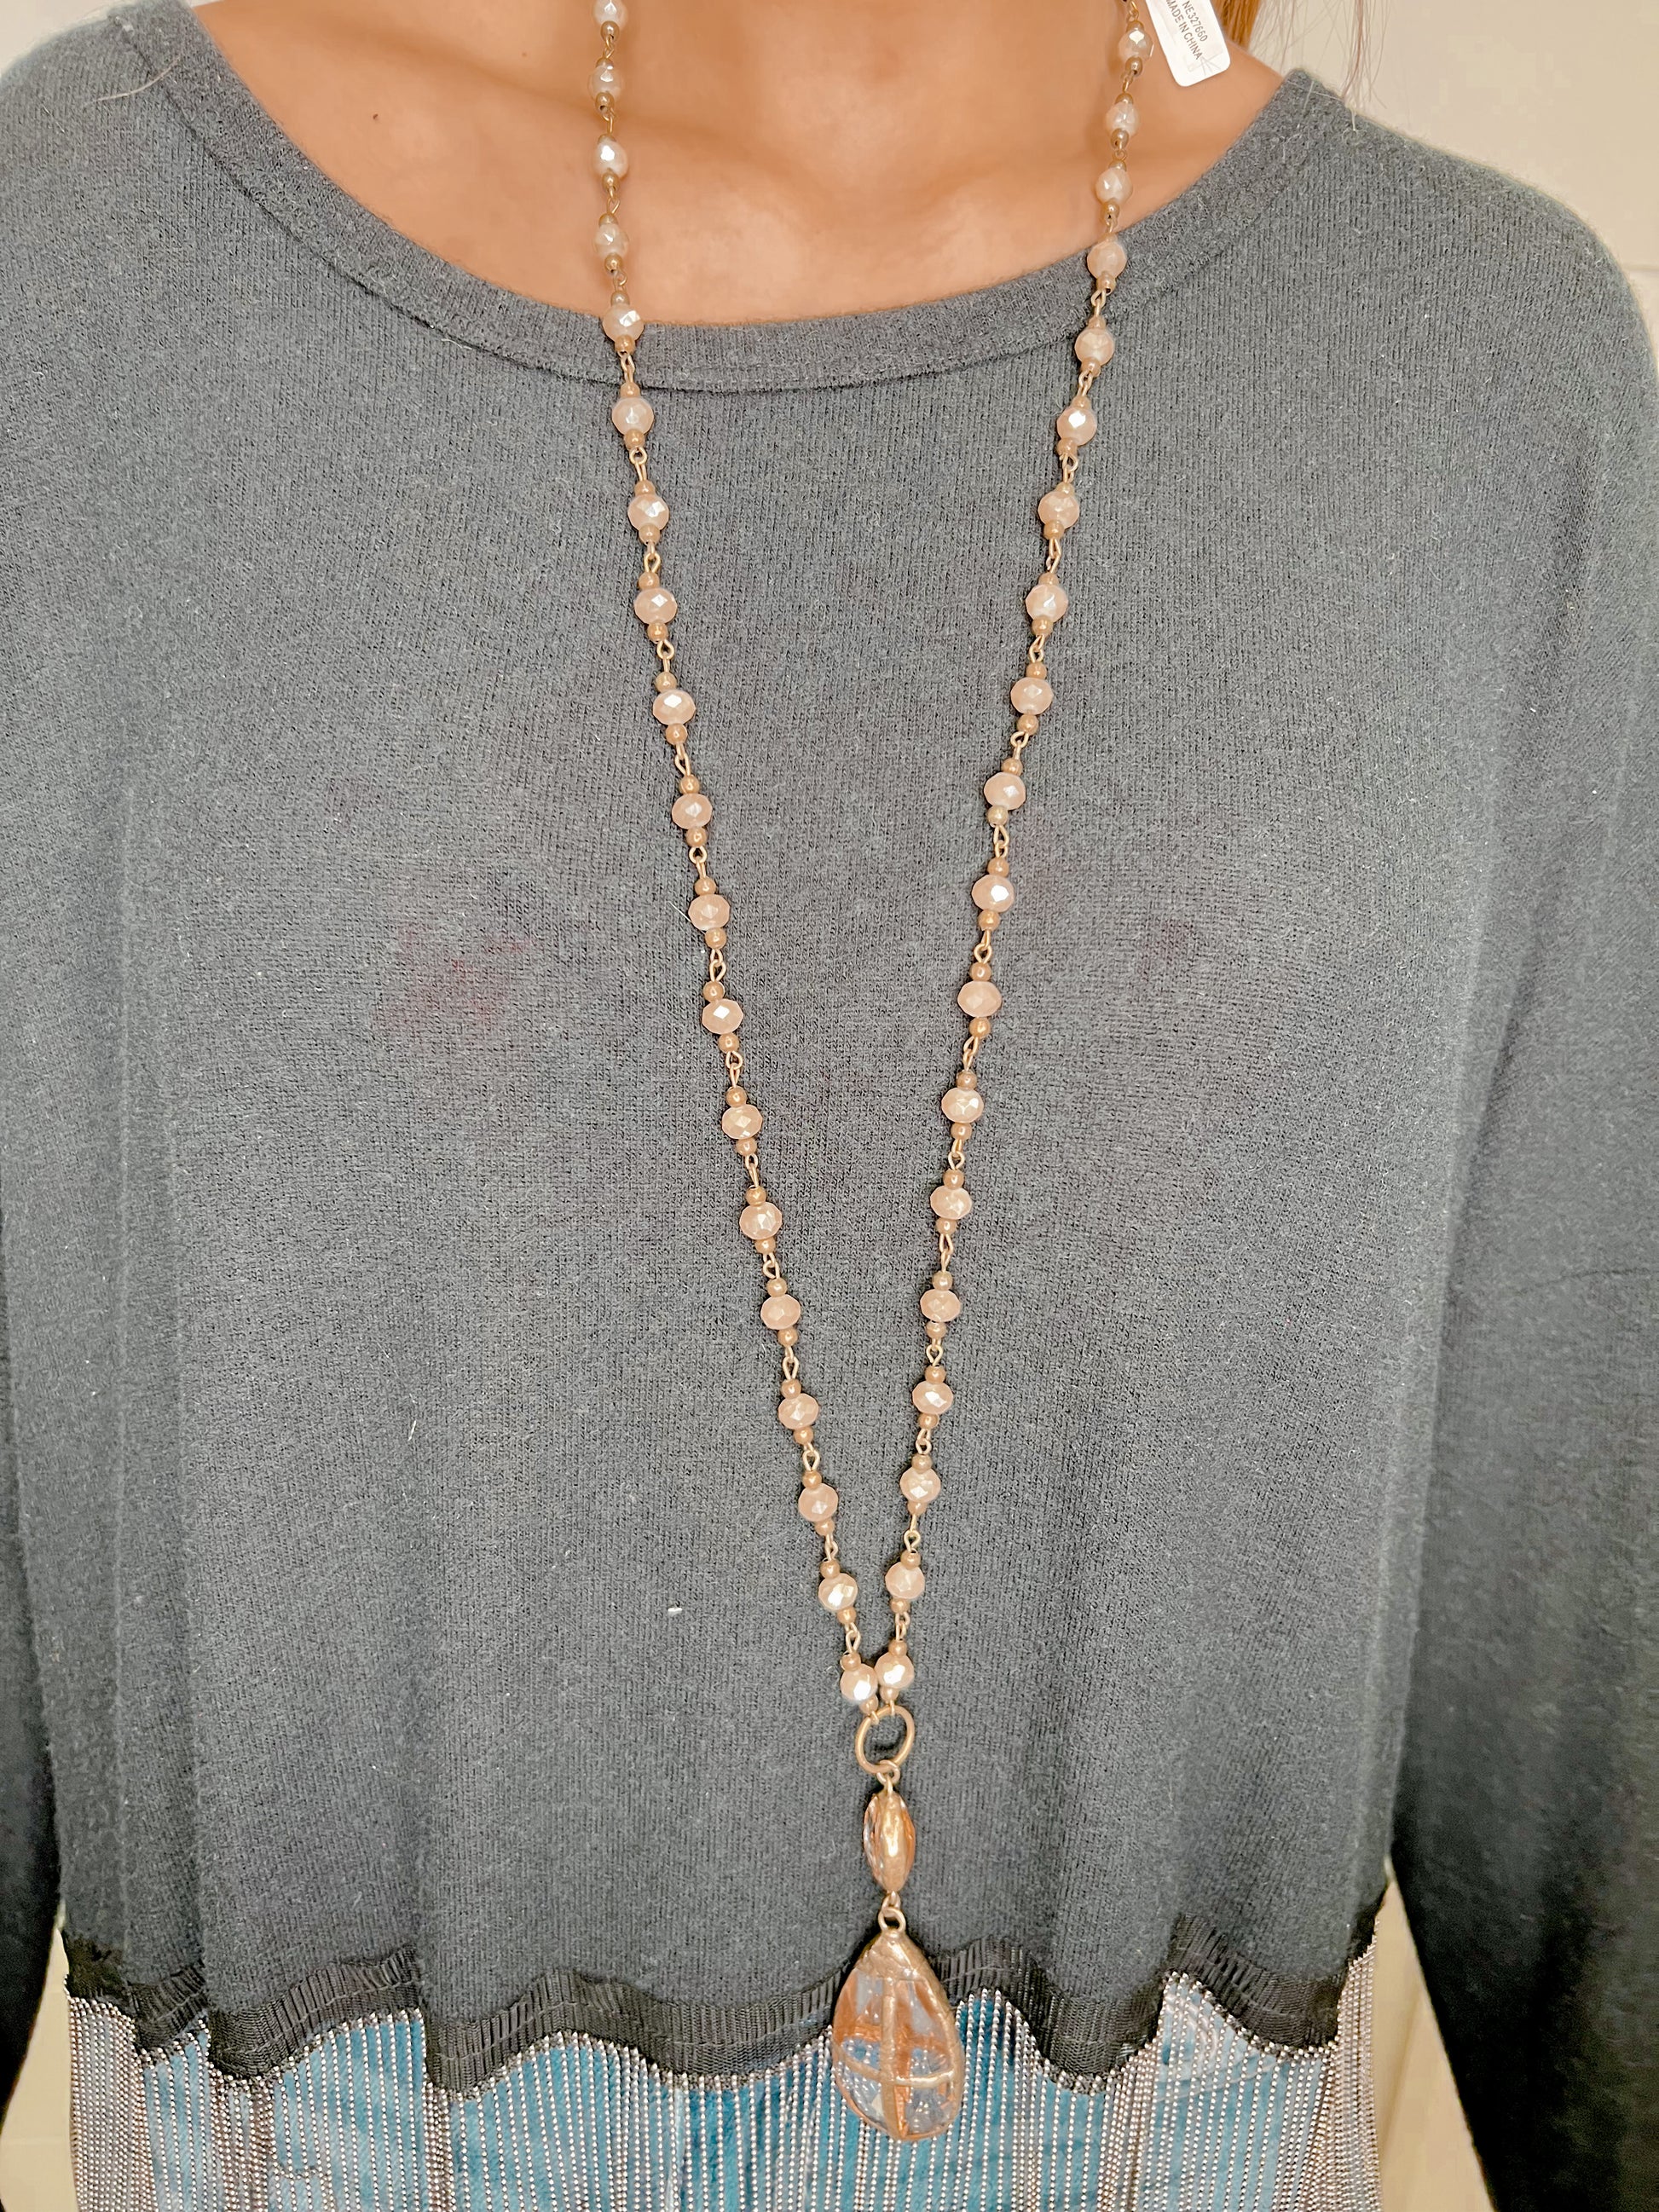 Antique Gold & Nude Crystal Bead Long Necklace with Large Teardrop Pendant-Necklace-OMO Jewelry-NE327660-The Twisted Chandelier